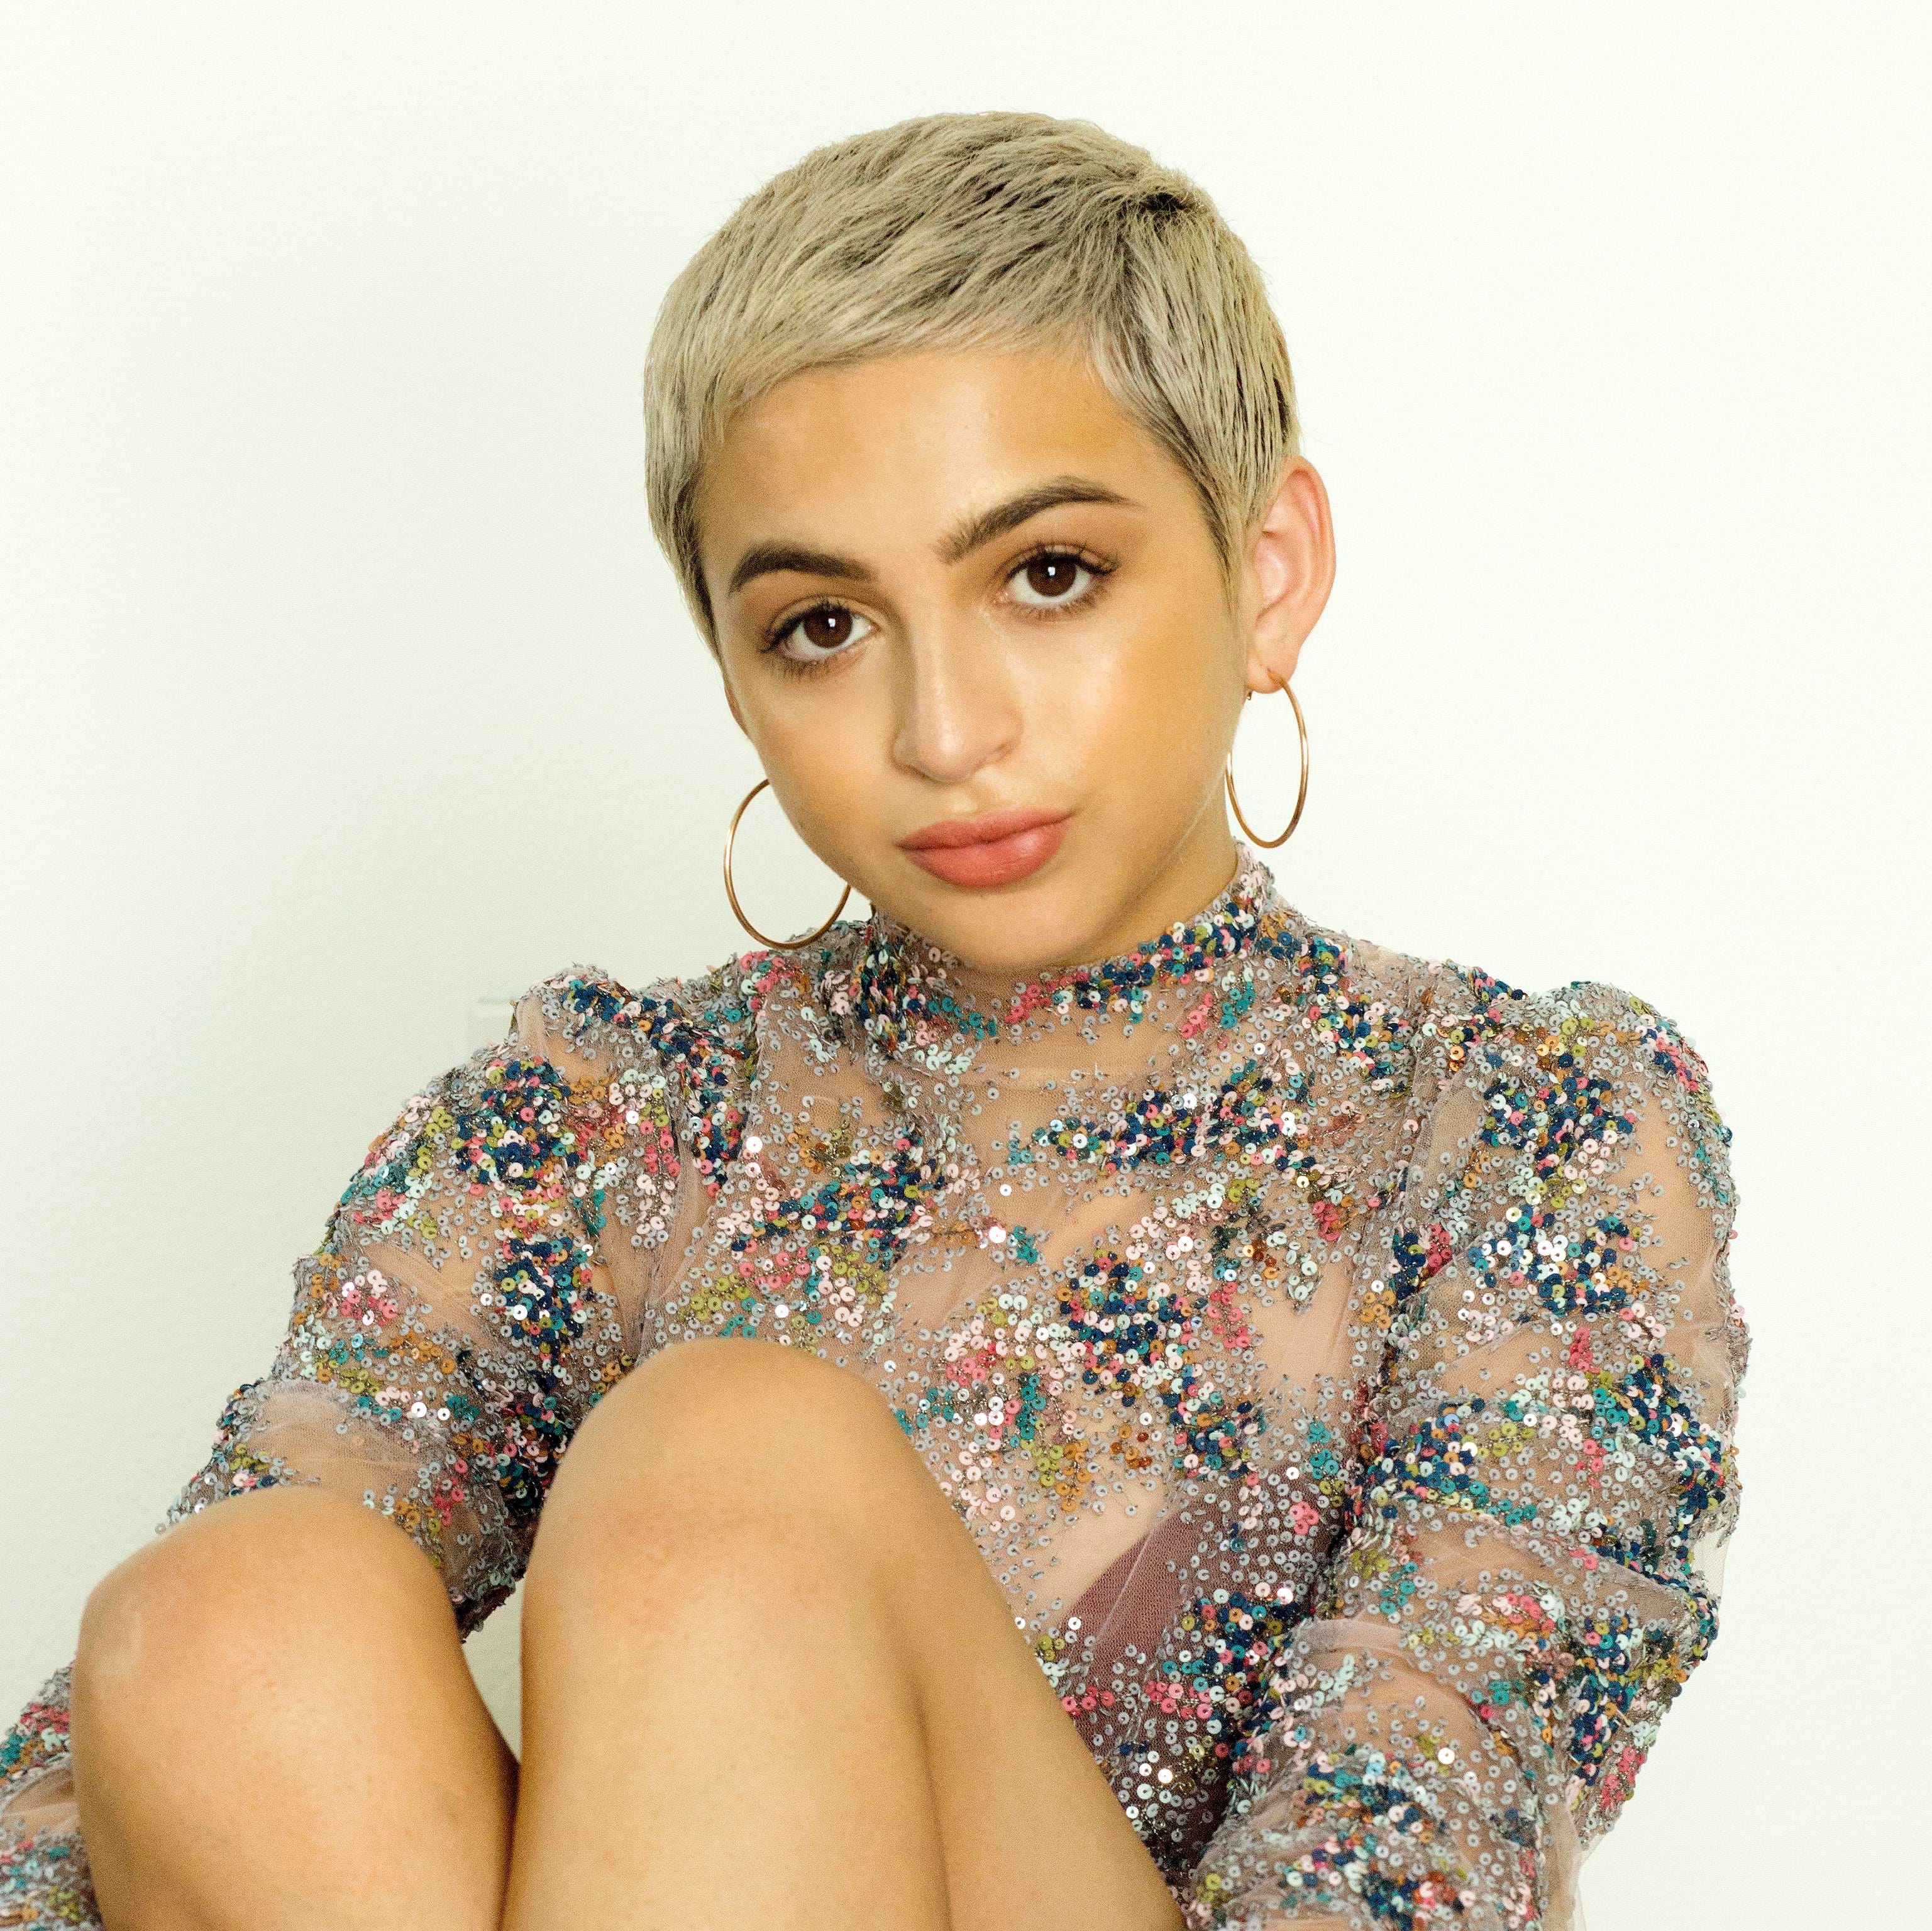 Josie Totah posing for a photoshoot by sitting on the ground.